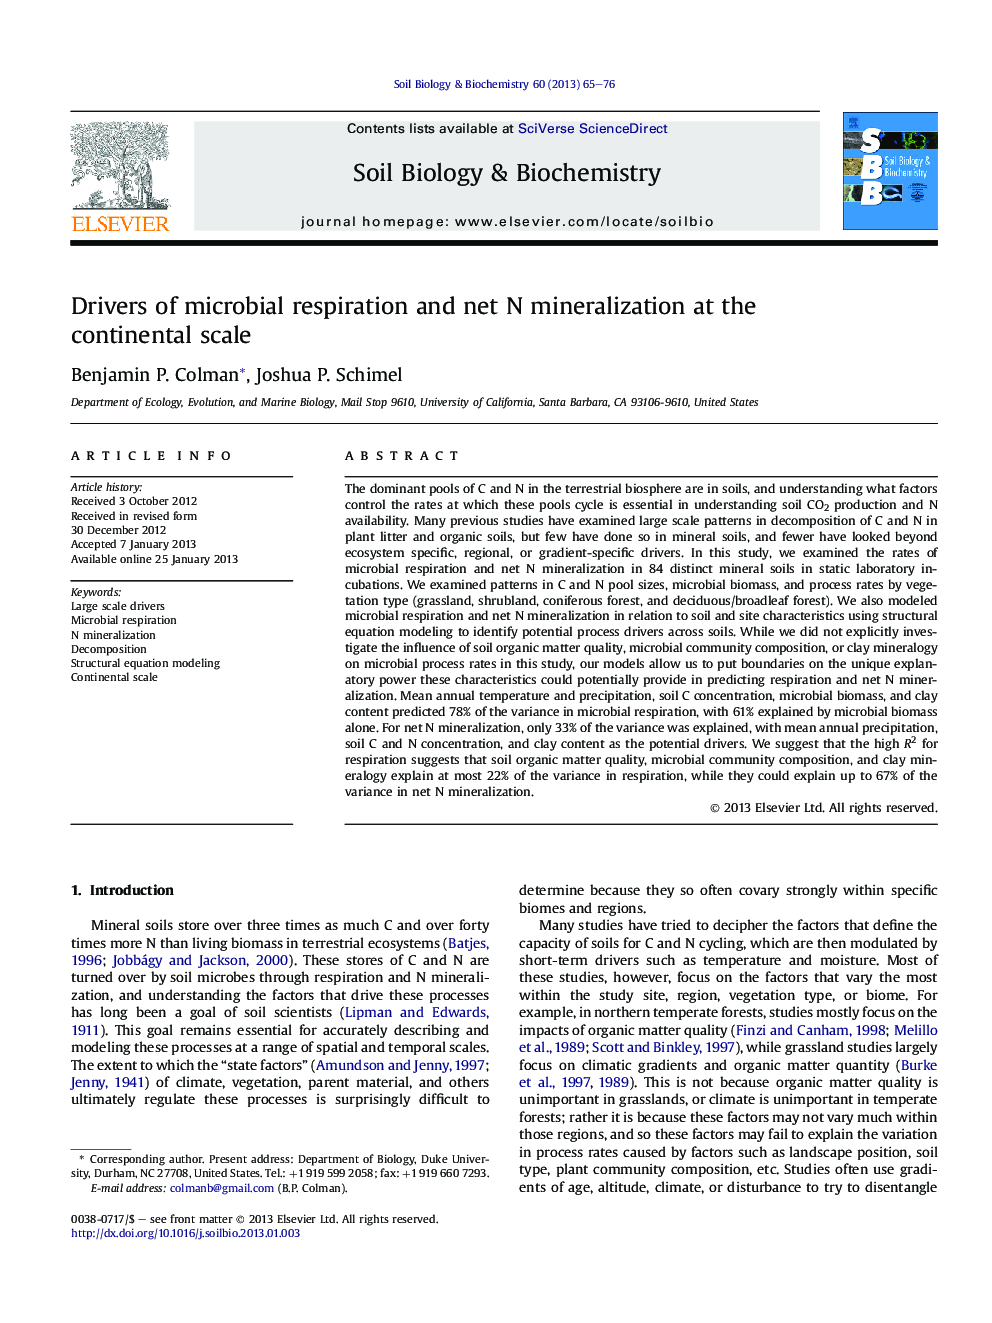 Drivers of microbial respiration and net N mineralization at the continental scale